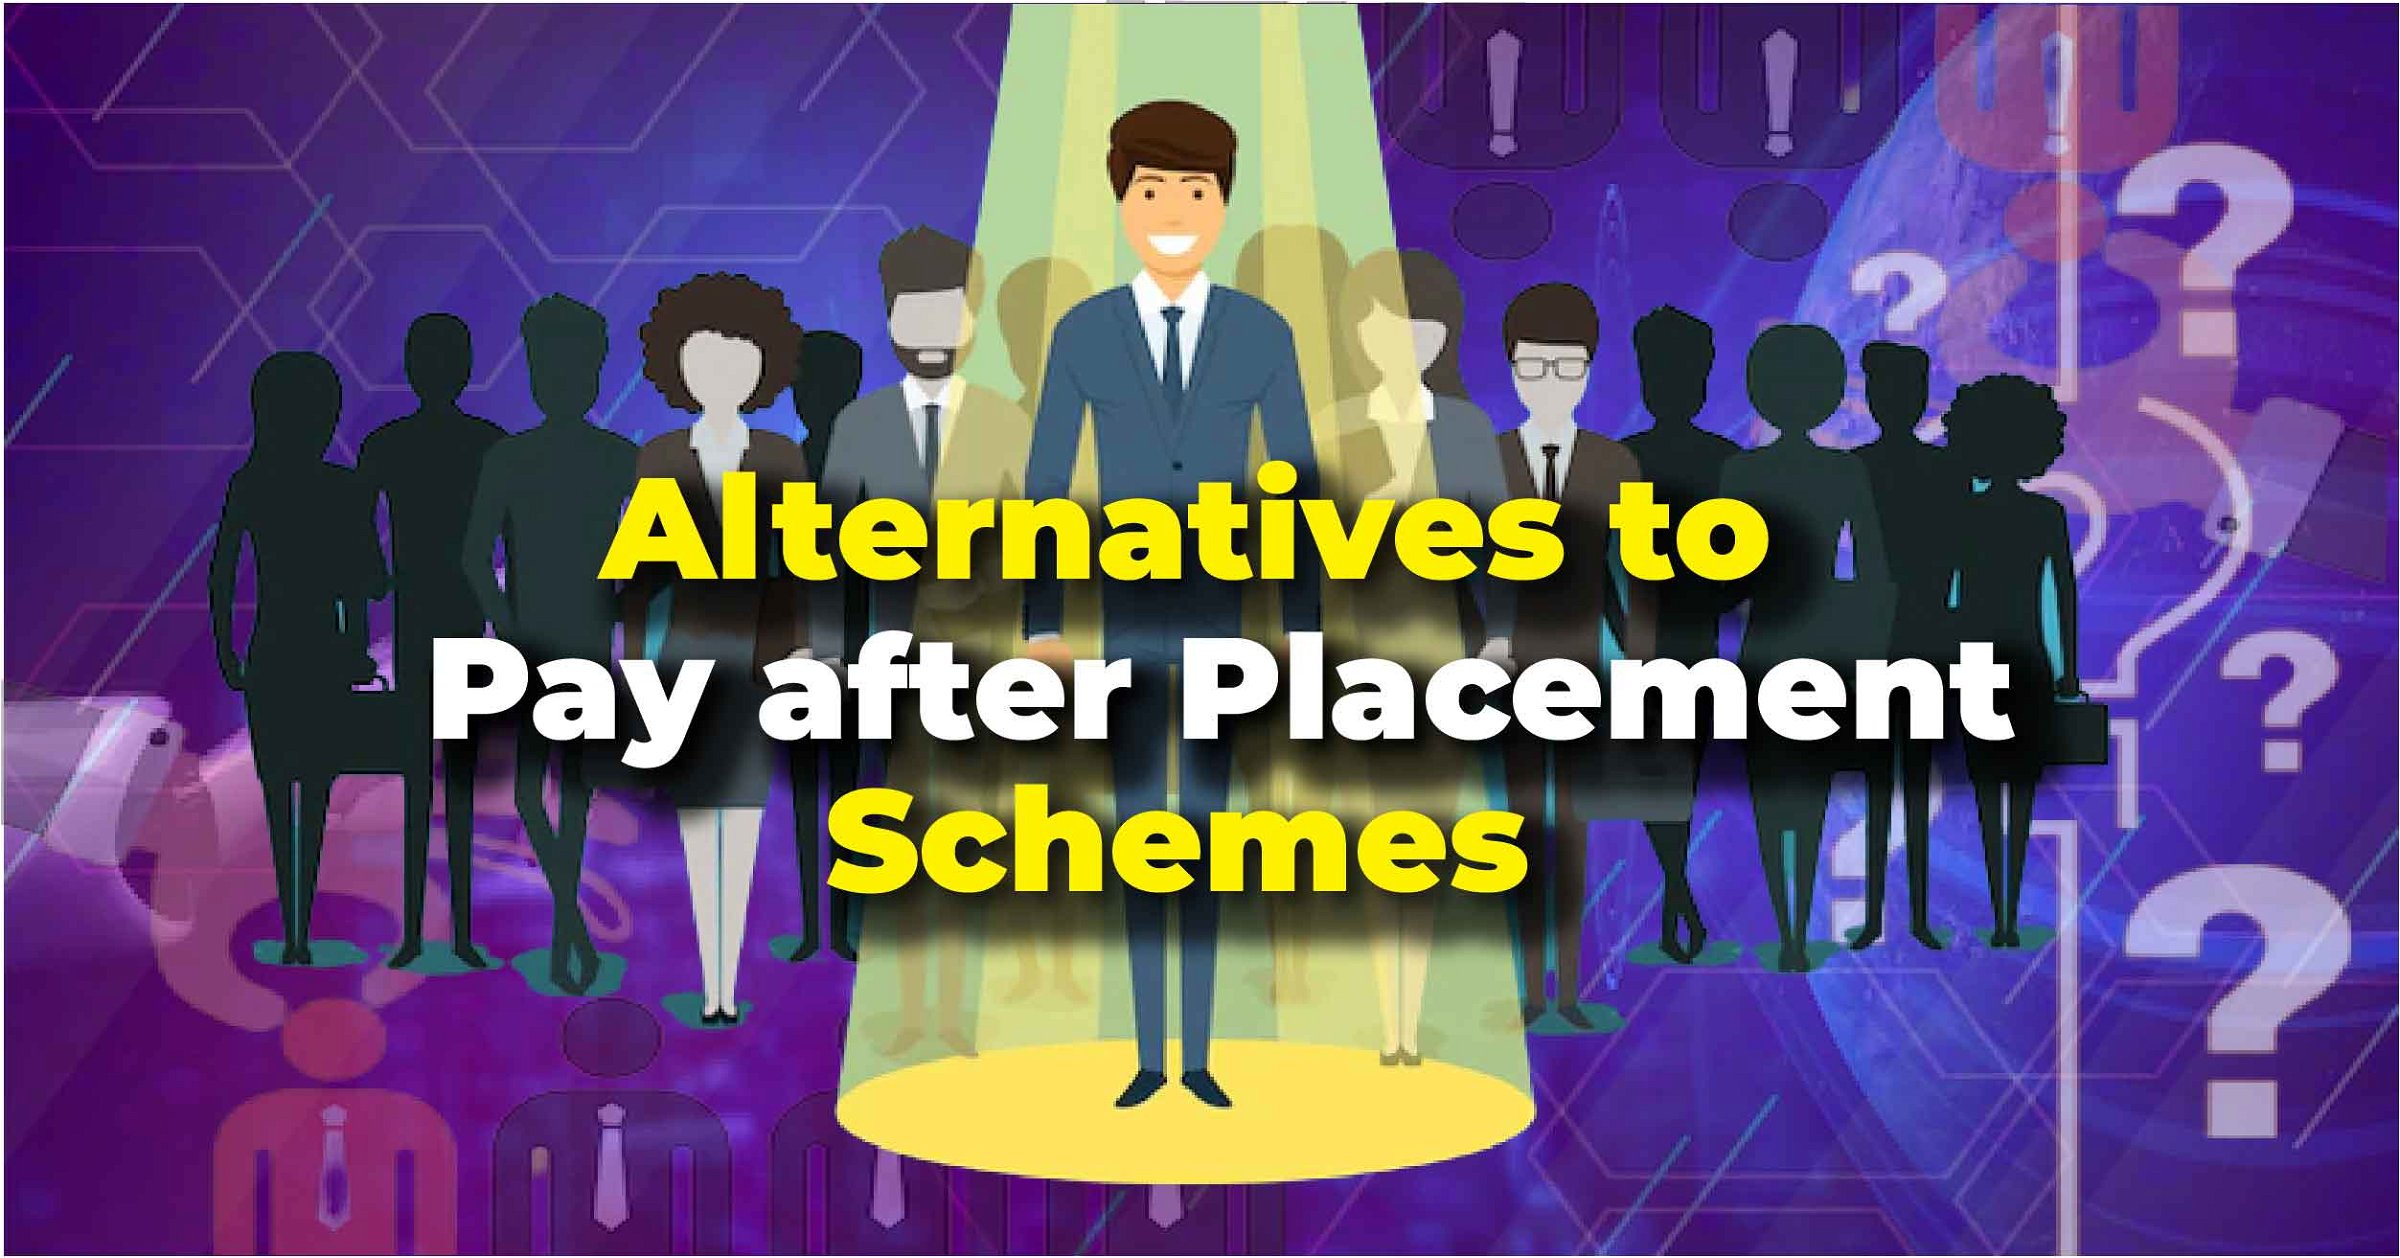 Alternatives to Pay after Placement Schemes